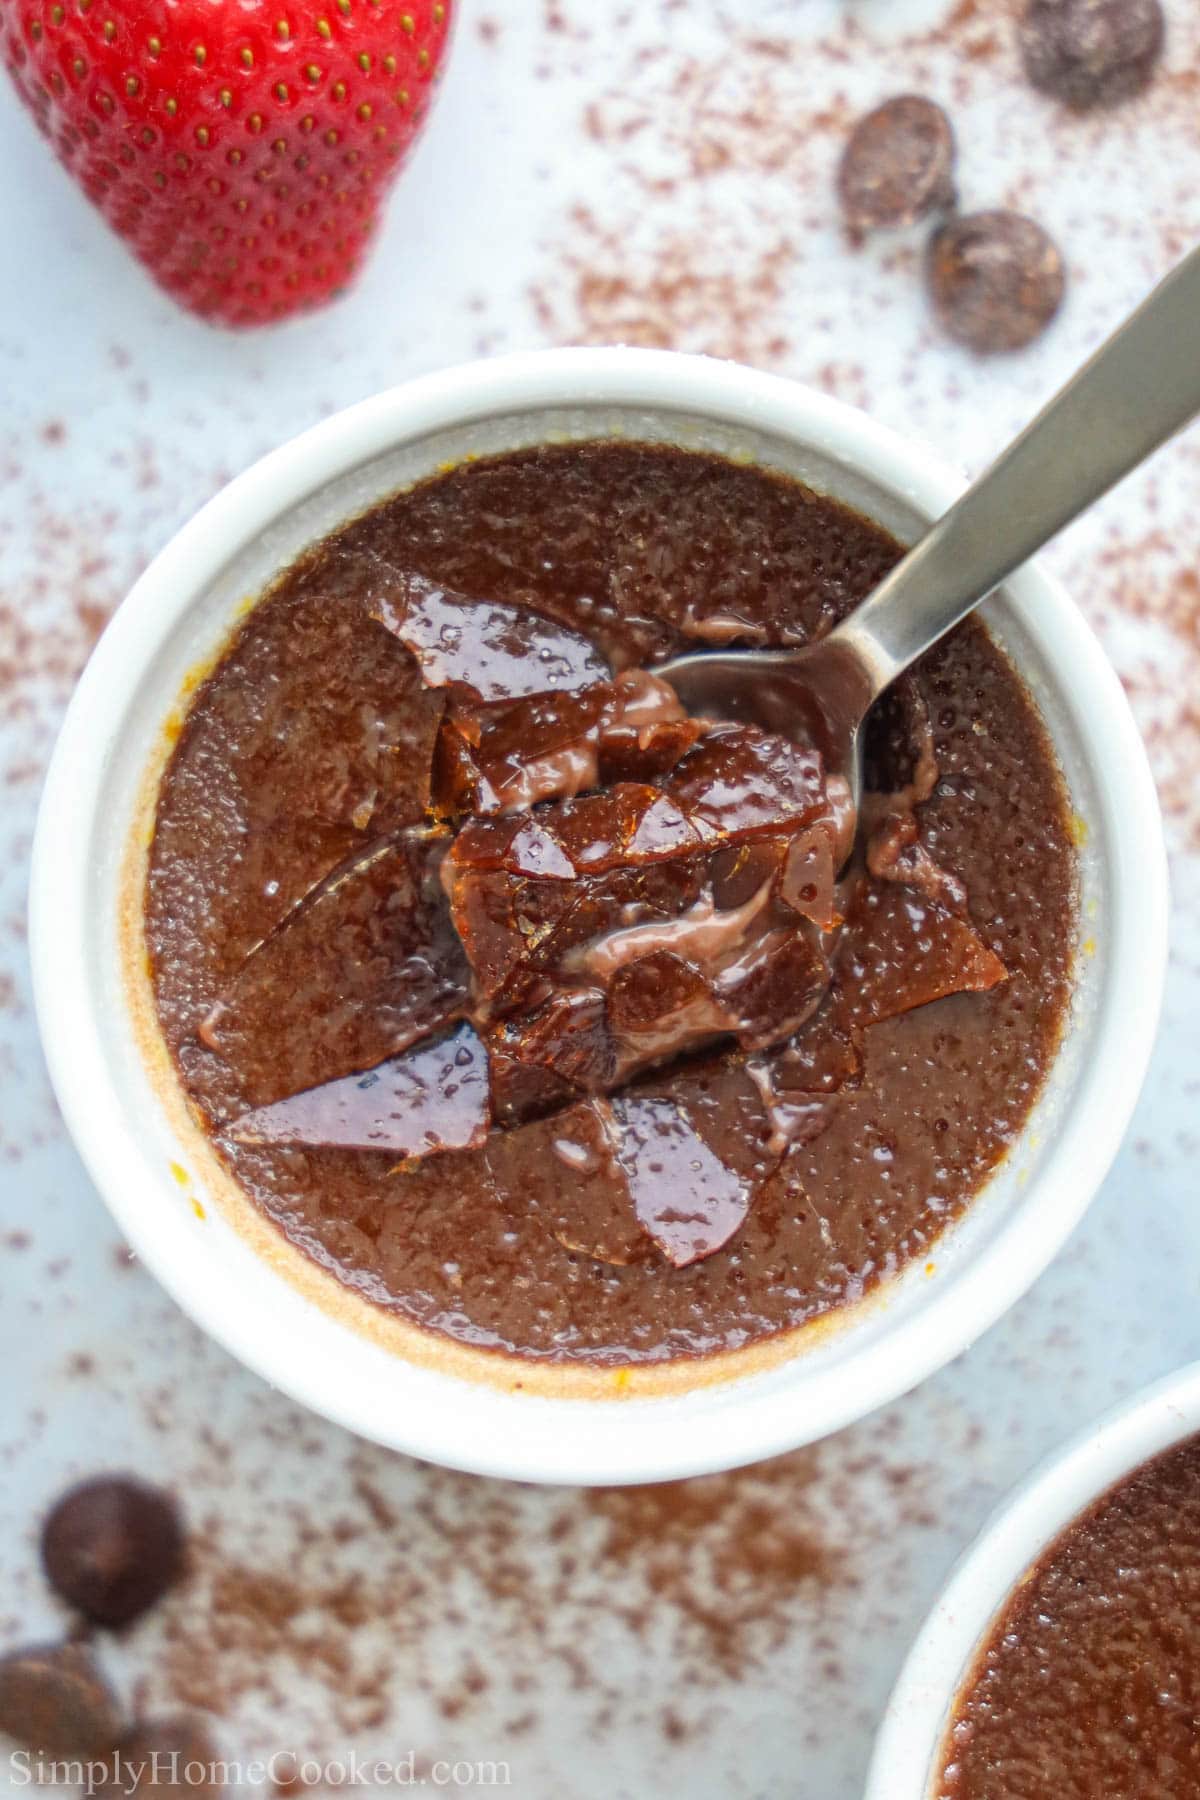 Chocolate Creme Brulee with a spoon dipped into it